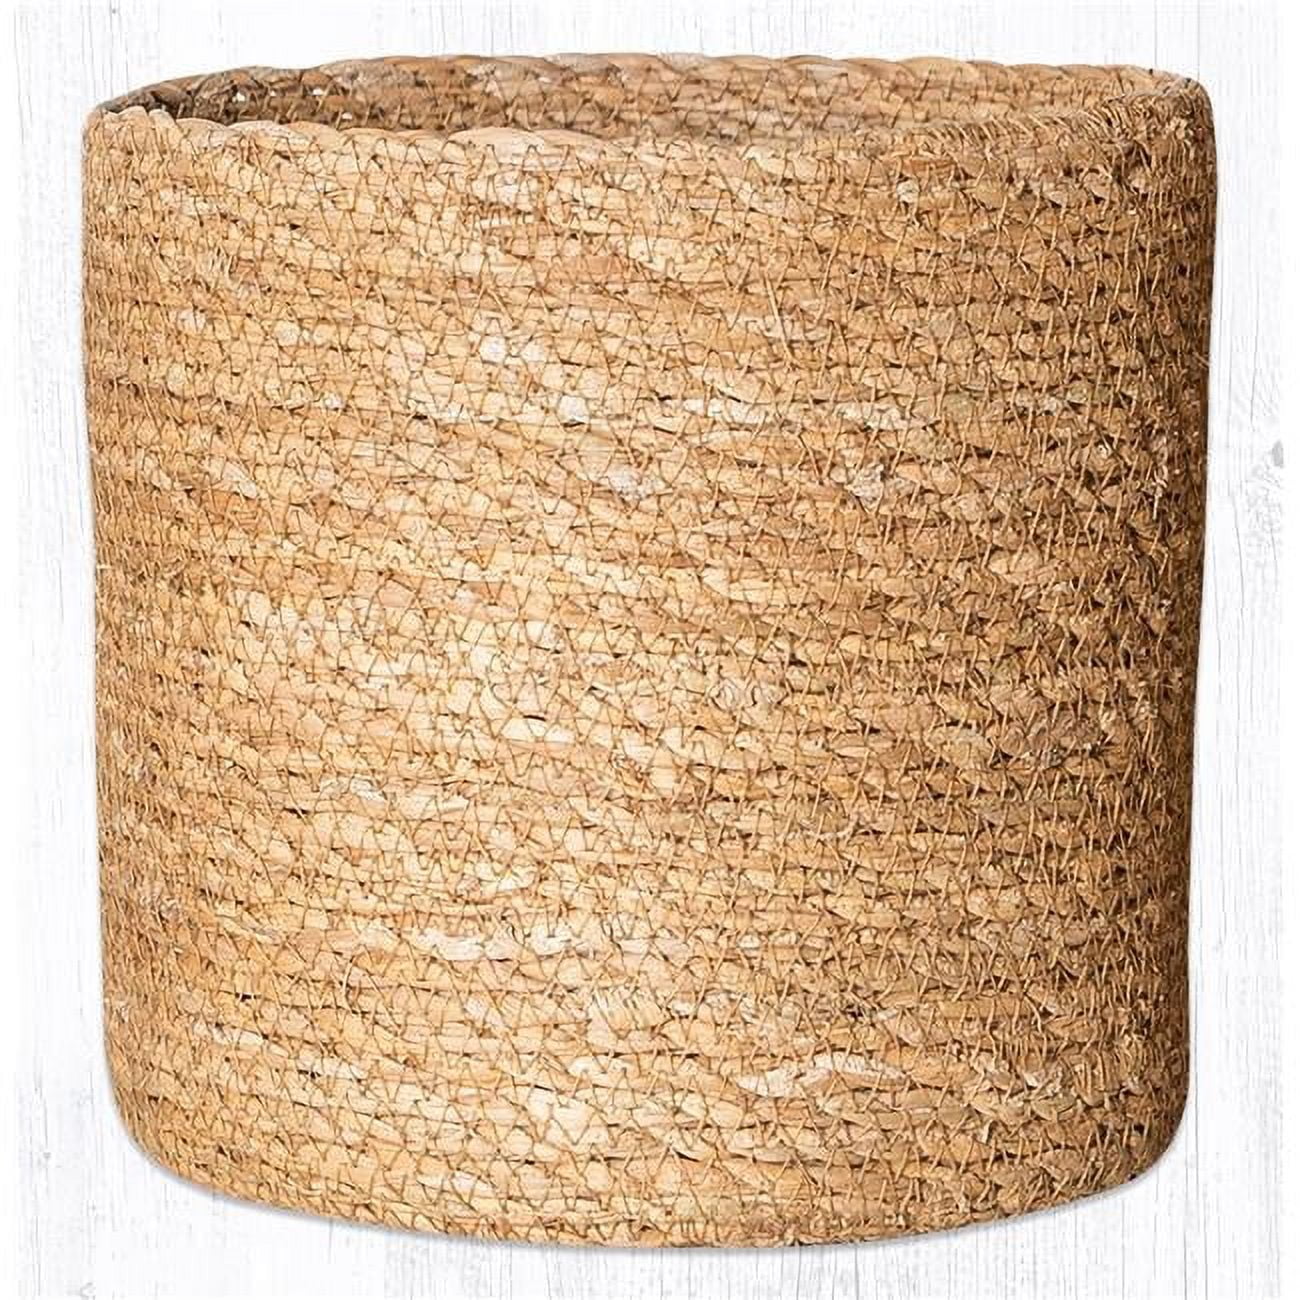 Picture of Capitol Importing 37-SGBLG001 7 x 7.5 in. SGB-01 Natural Sedge Grass Basket